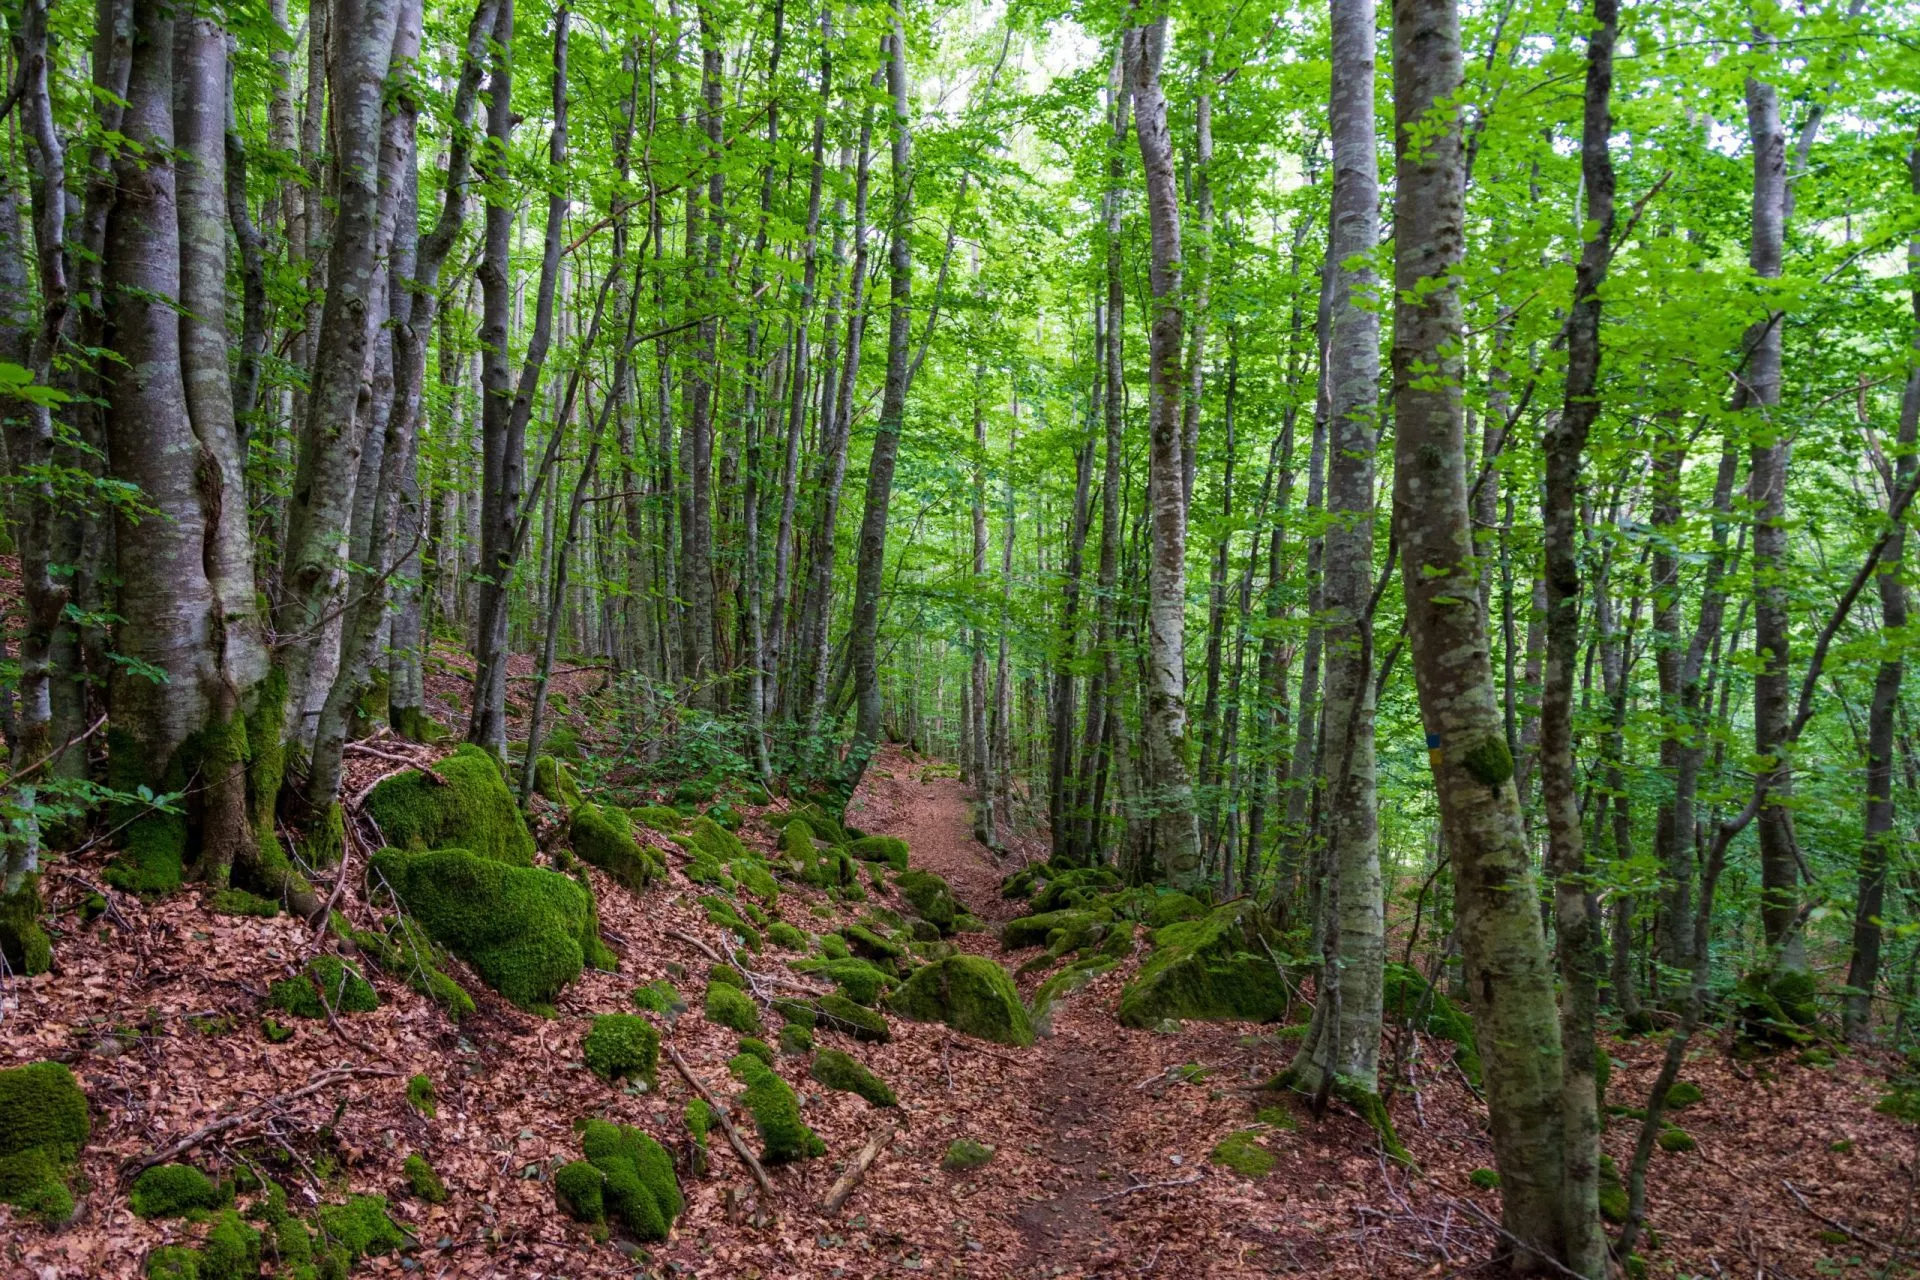 Trail covered by brown fallen leaves in a shaded green forest of beech trees.  Orecchiella Natural Reserve - San Romano in Garfagnana, Tuscany - Italy